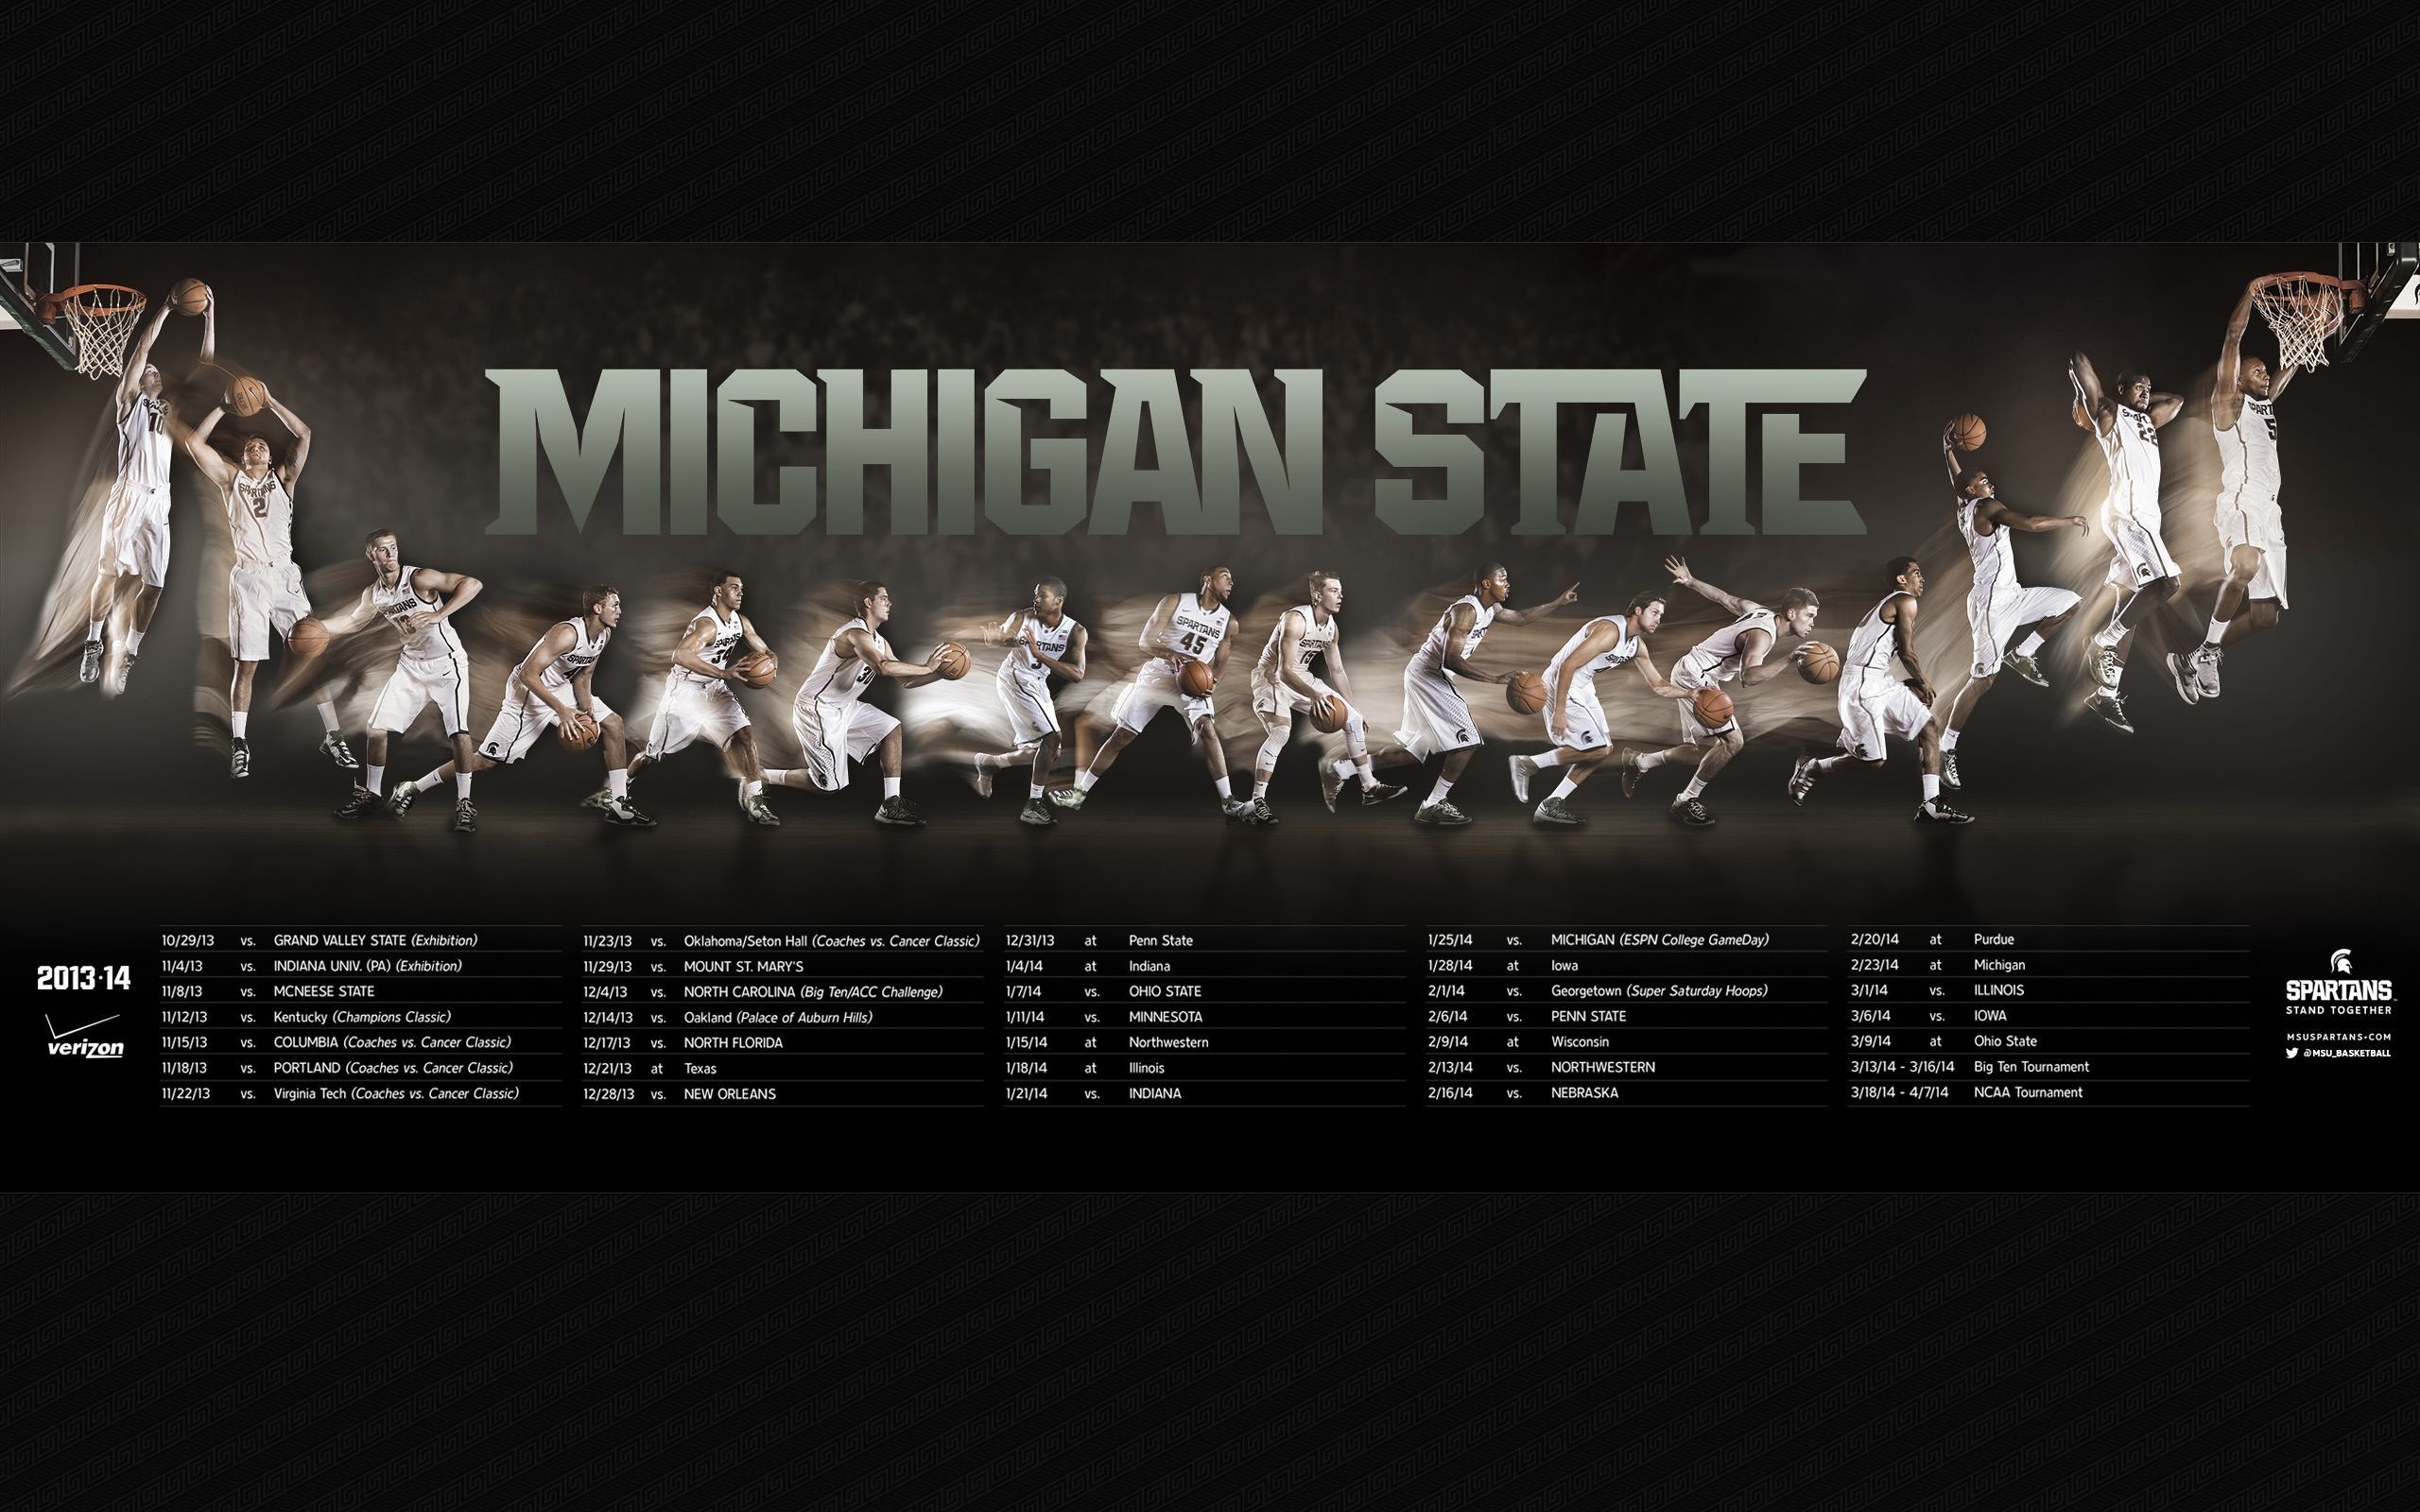 2560x1600 Michigan State Basketball Wallpapers by Doris Phillips #3